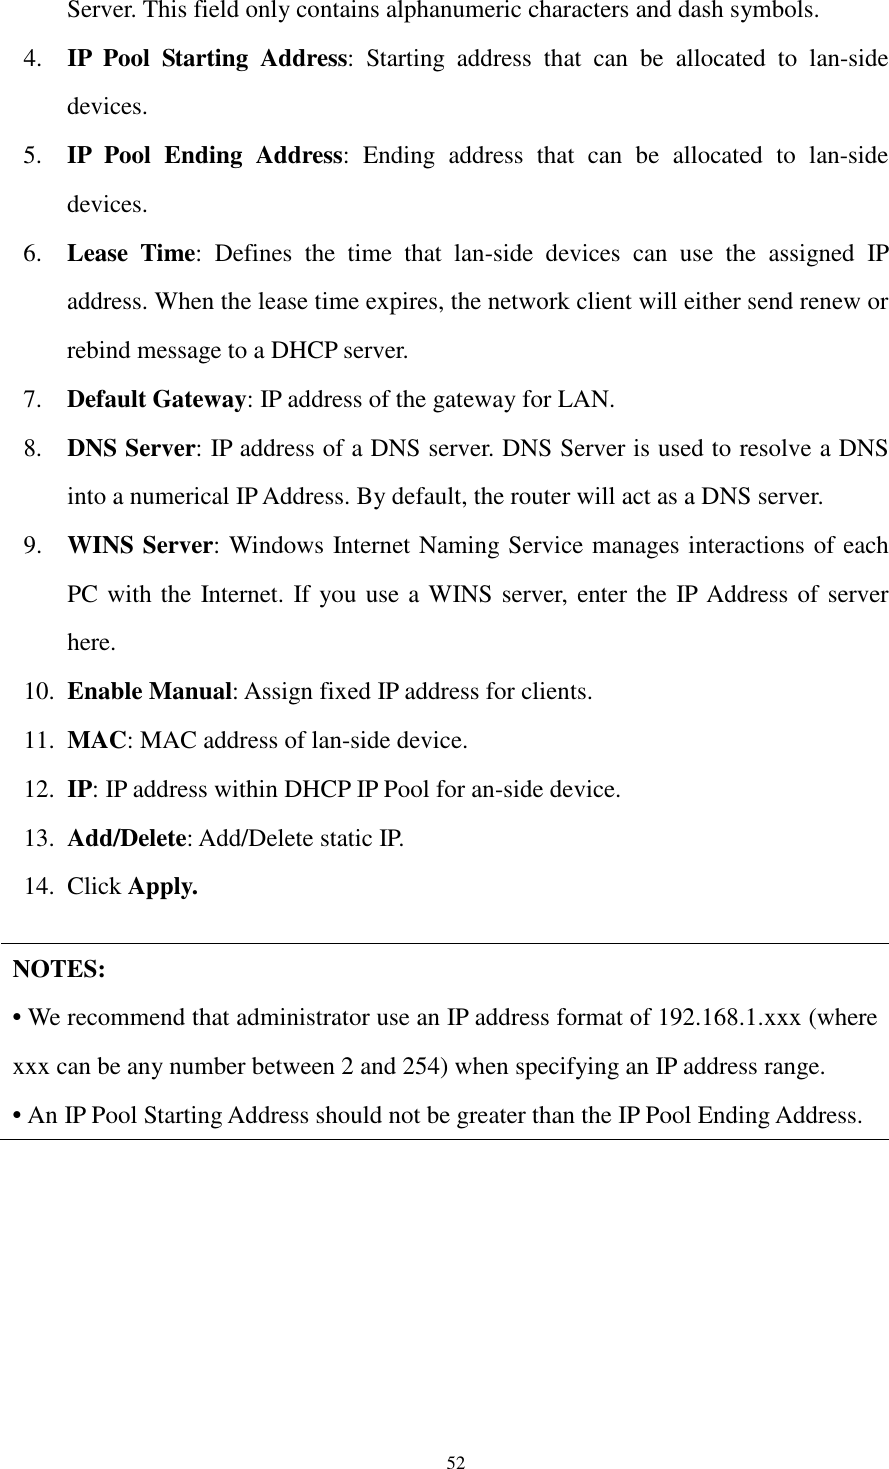  52 Server. This field only contains alphanumeric characters and dash symbols. 4. IP  Pool  Starting  Address:  Starting  address  that  can  be  allocated  to  lan-side devices.   5. IP  Pool  Ending  Address:  Ending  address  that  can  be  allocated  to  lan-side devices.   6. Lease  Time:  Defines  the  time  that  lan-side  devices  can  use  the  assigned  IP address. When the lease time expires, the network client will either send renew or rebind message to a DHCP server. 7. Default Gateway: IP address of the gateway for LAN.   8. DNS Server: IP address of a DNS server. DNS Server is used to resolve a DNS into a numerical IP Address. By default, the router will act as a DNS server. 9. WINS Server: Windows Internet Naming Service manages interactions of each PC with the Internet. If you use a WINS server, enter the IP Address of server here. 10. Enable Manual: Assign fixed IP address for clients.   11. MAC: MAC address of lan-side device. 12. IP: IP address within DHCP IP Pool for an-side device. 13. Add/Delete: Add/Delete static IP.   14. Click Apply.  NOTES: • We recommend that administrator use an IP address format of 192.168.1.xxx (where xxx can be any number between 2 and 254) when specifying an IP address range. • An IP Pool Starting Address should not be greater than the IP Pool Ending Address.  